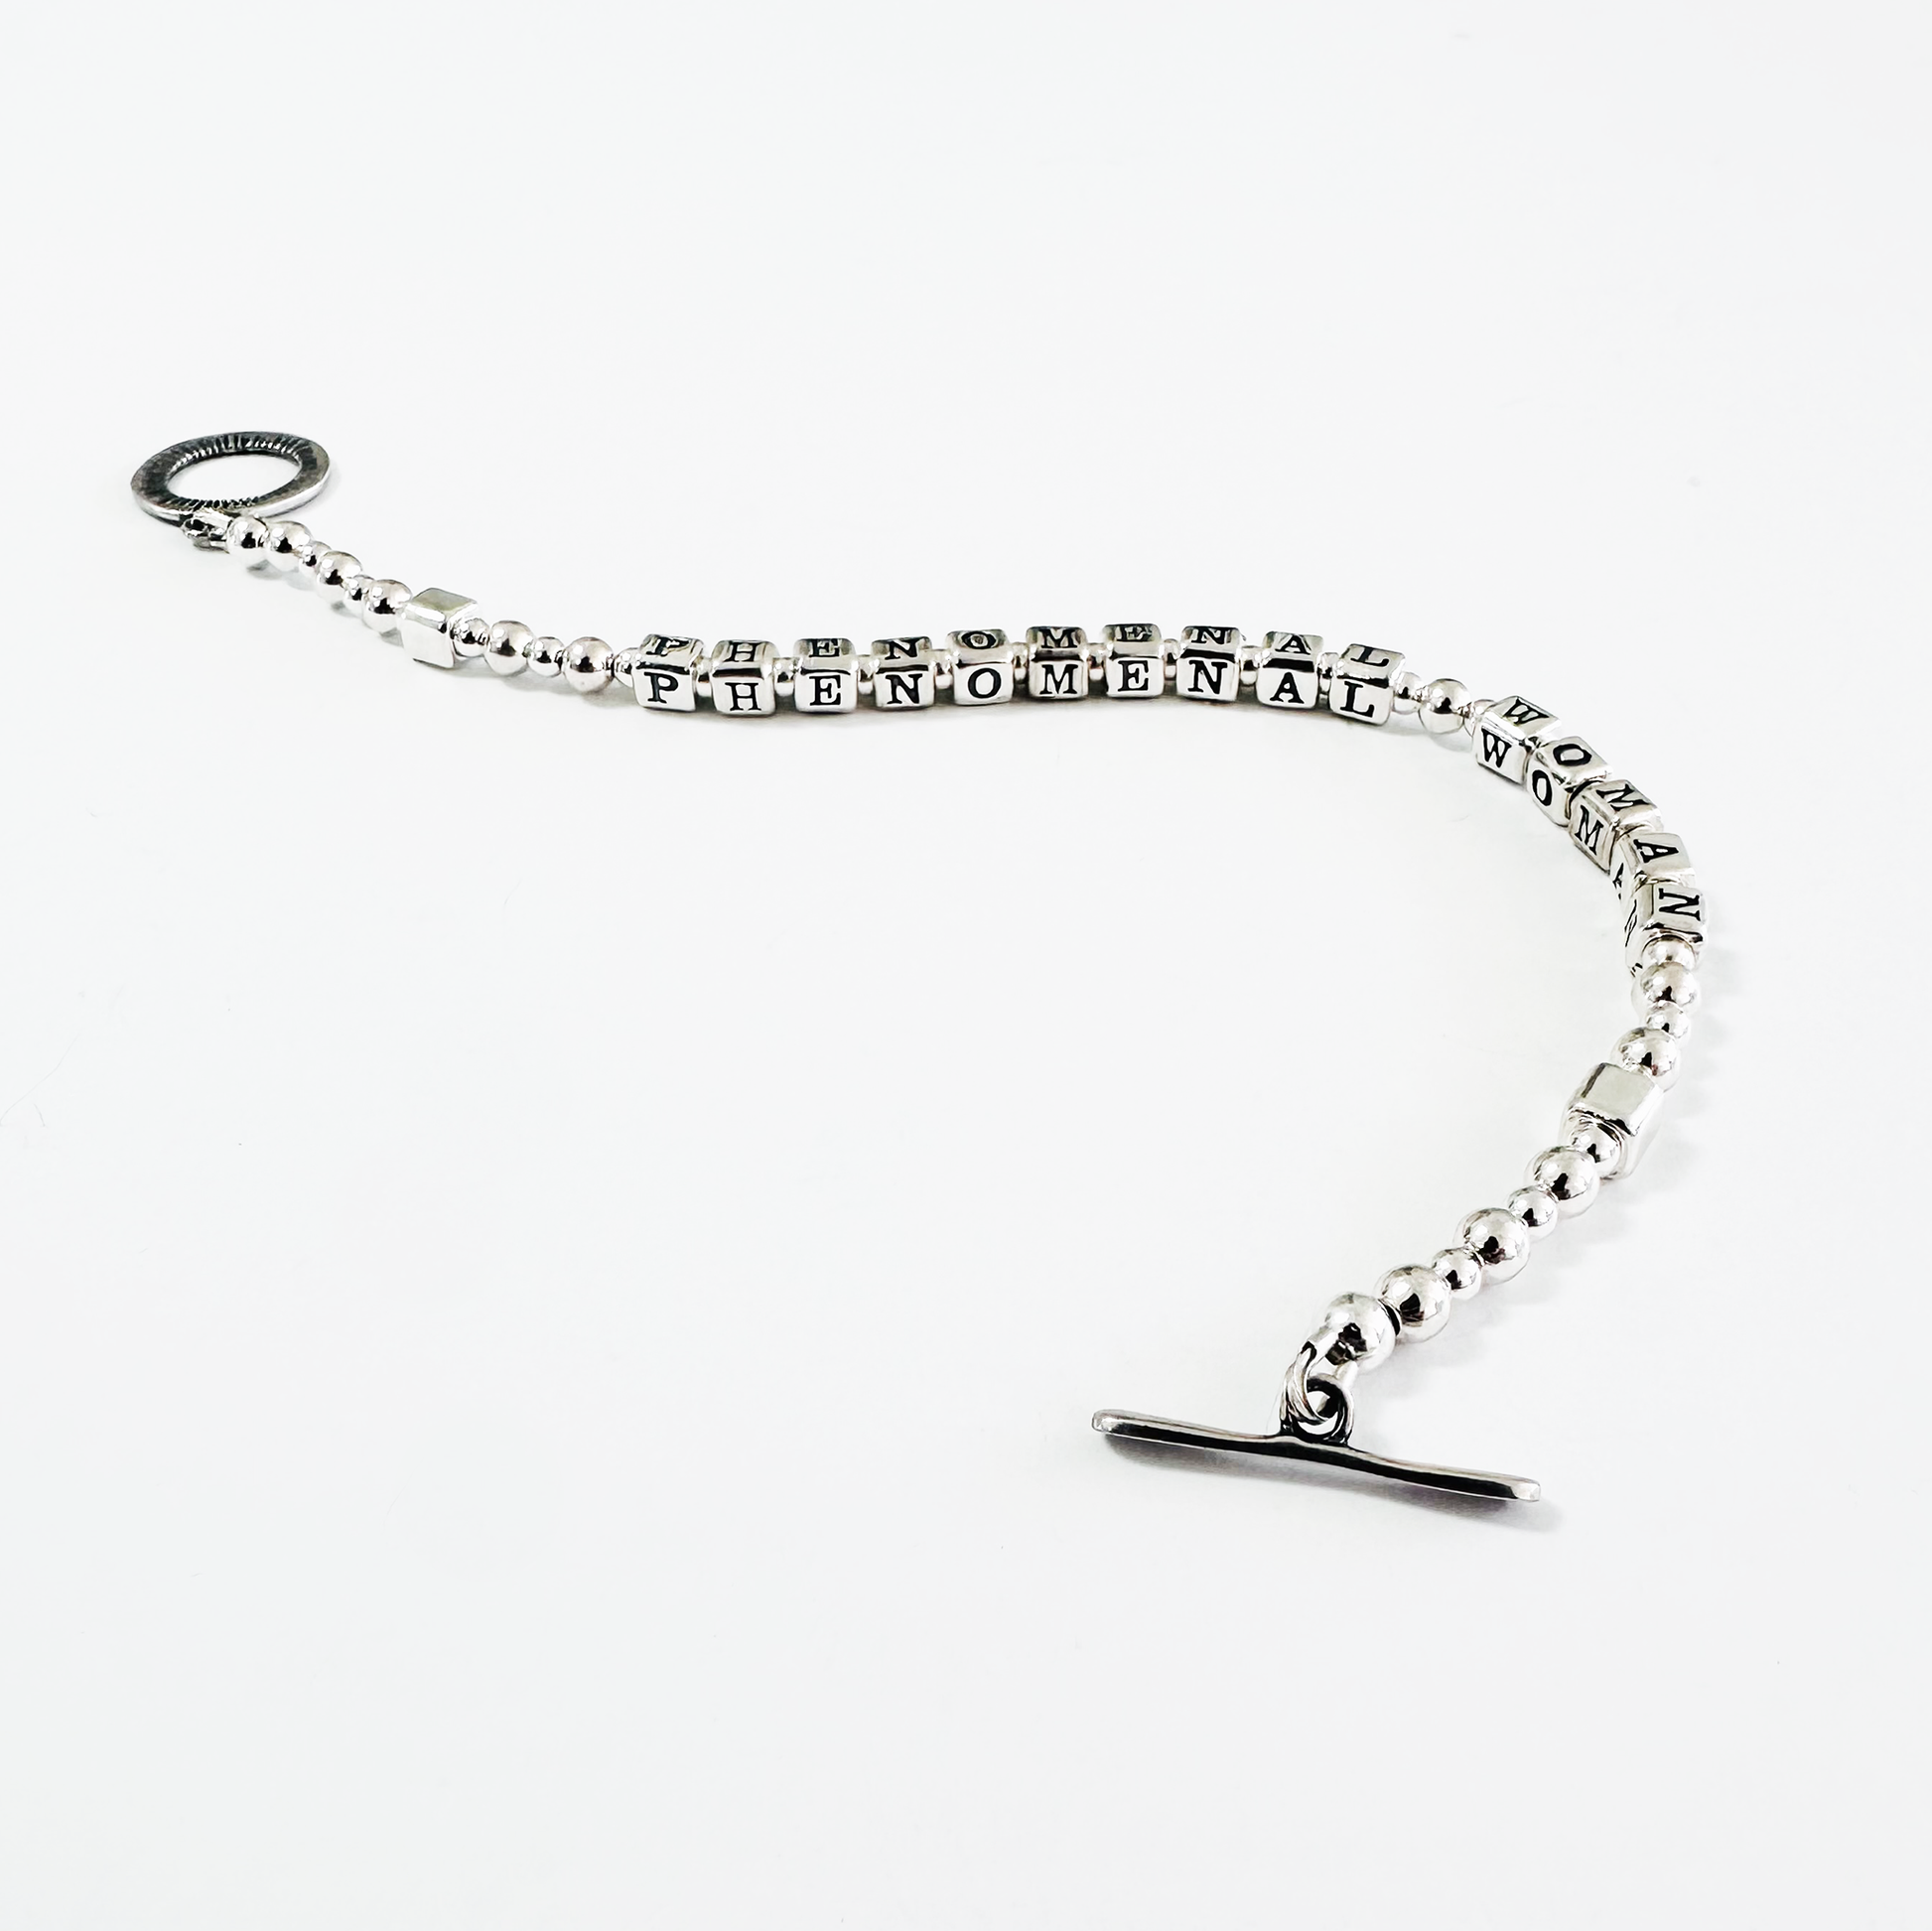 Phenomenal Woman high quality gifting bracelet in all sterling silver